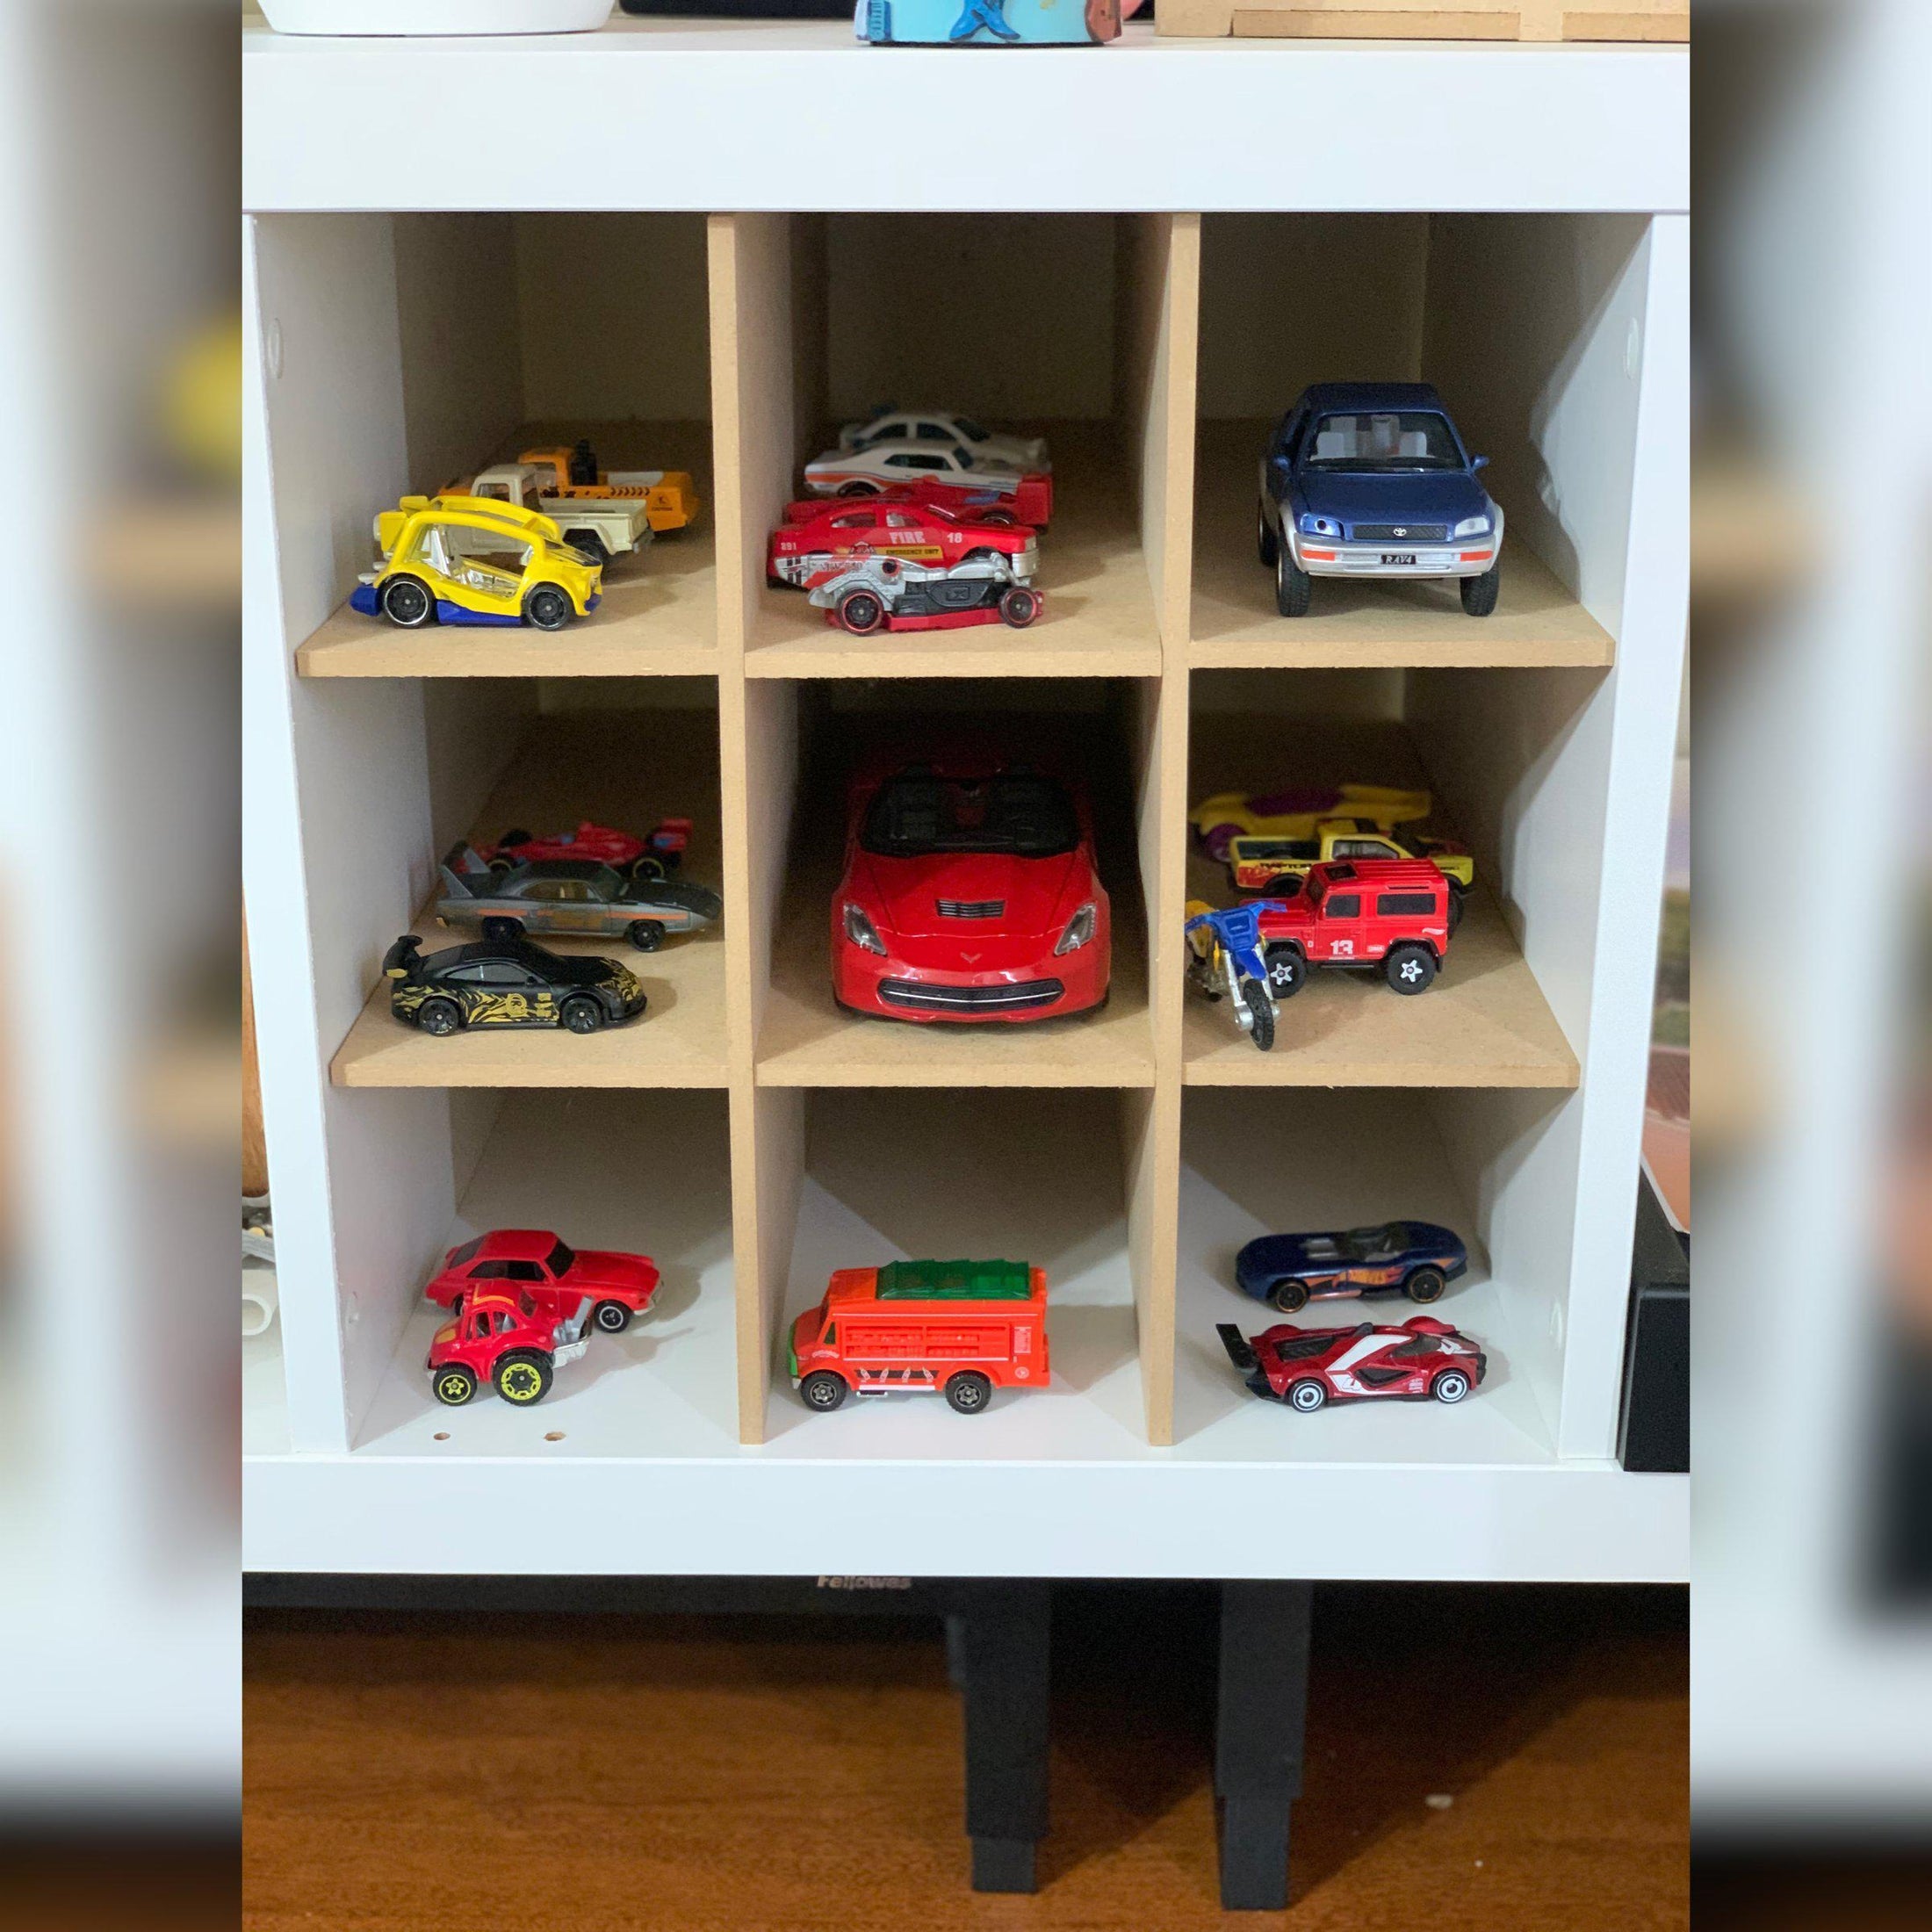 9 Cubby Cube Insert for Cube Storage Shelves displaying a toy car collection-The Steady Hand